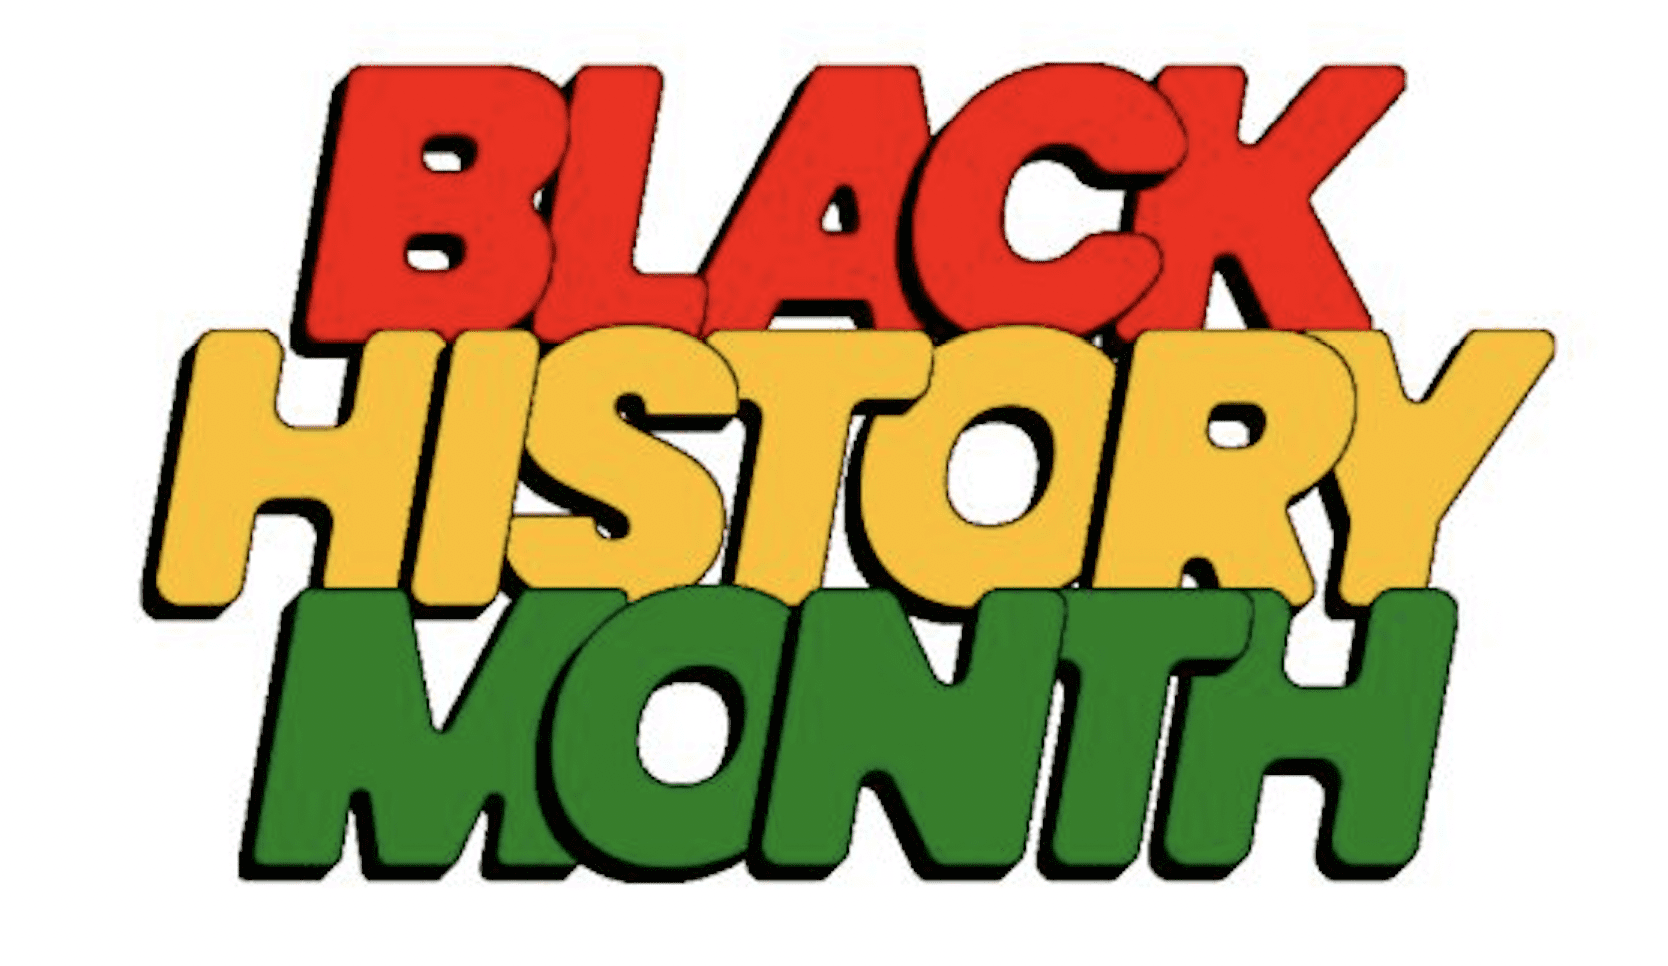 white-students-banned-from-black-history-month-events-at-the-university-of-‘wokeminster’